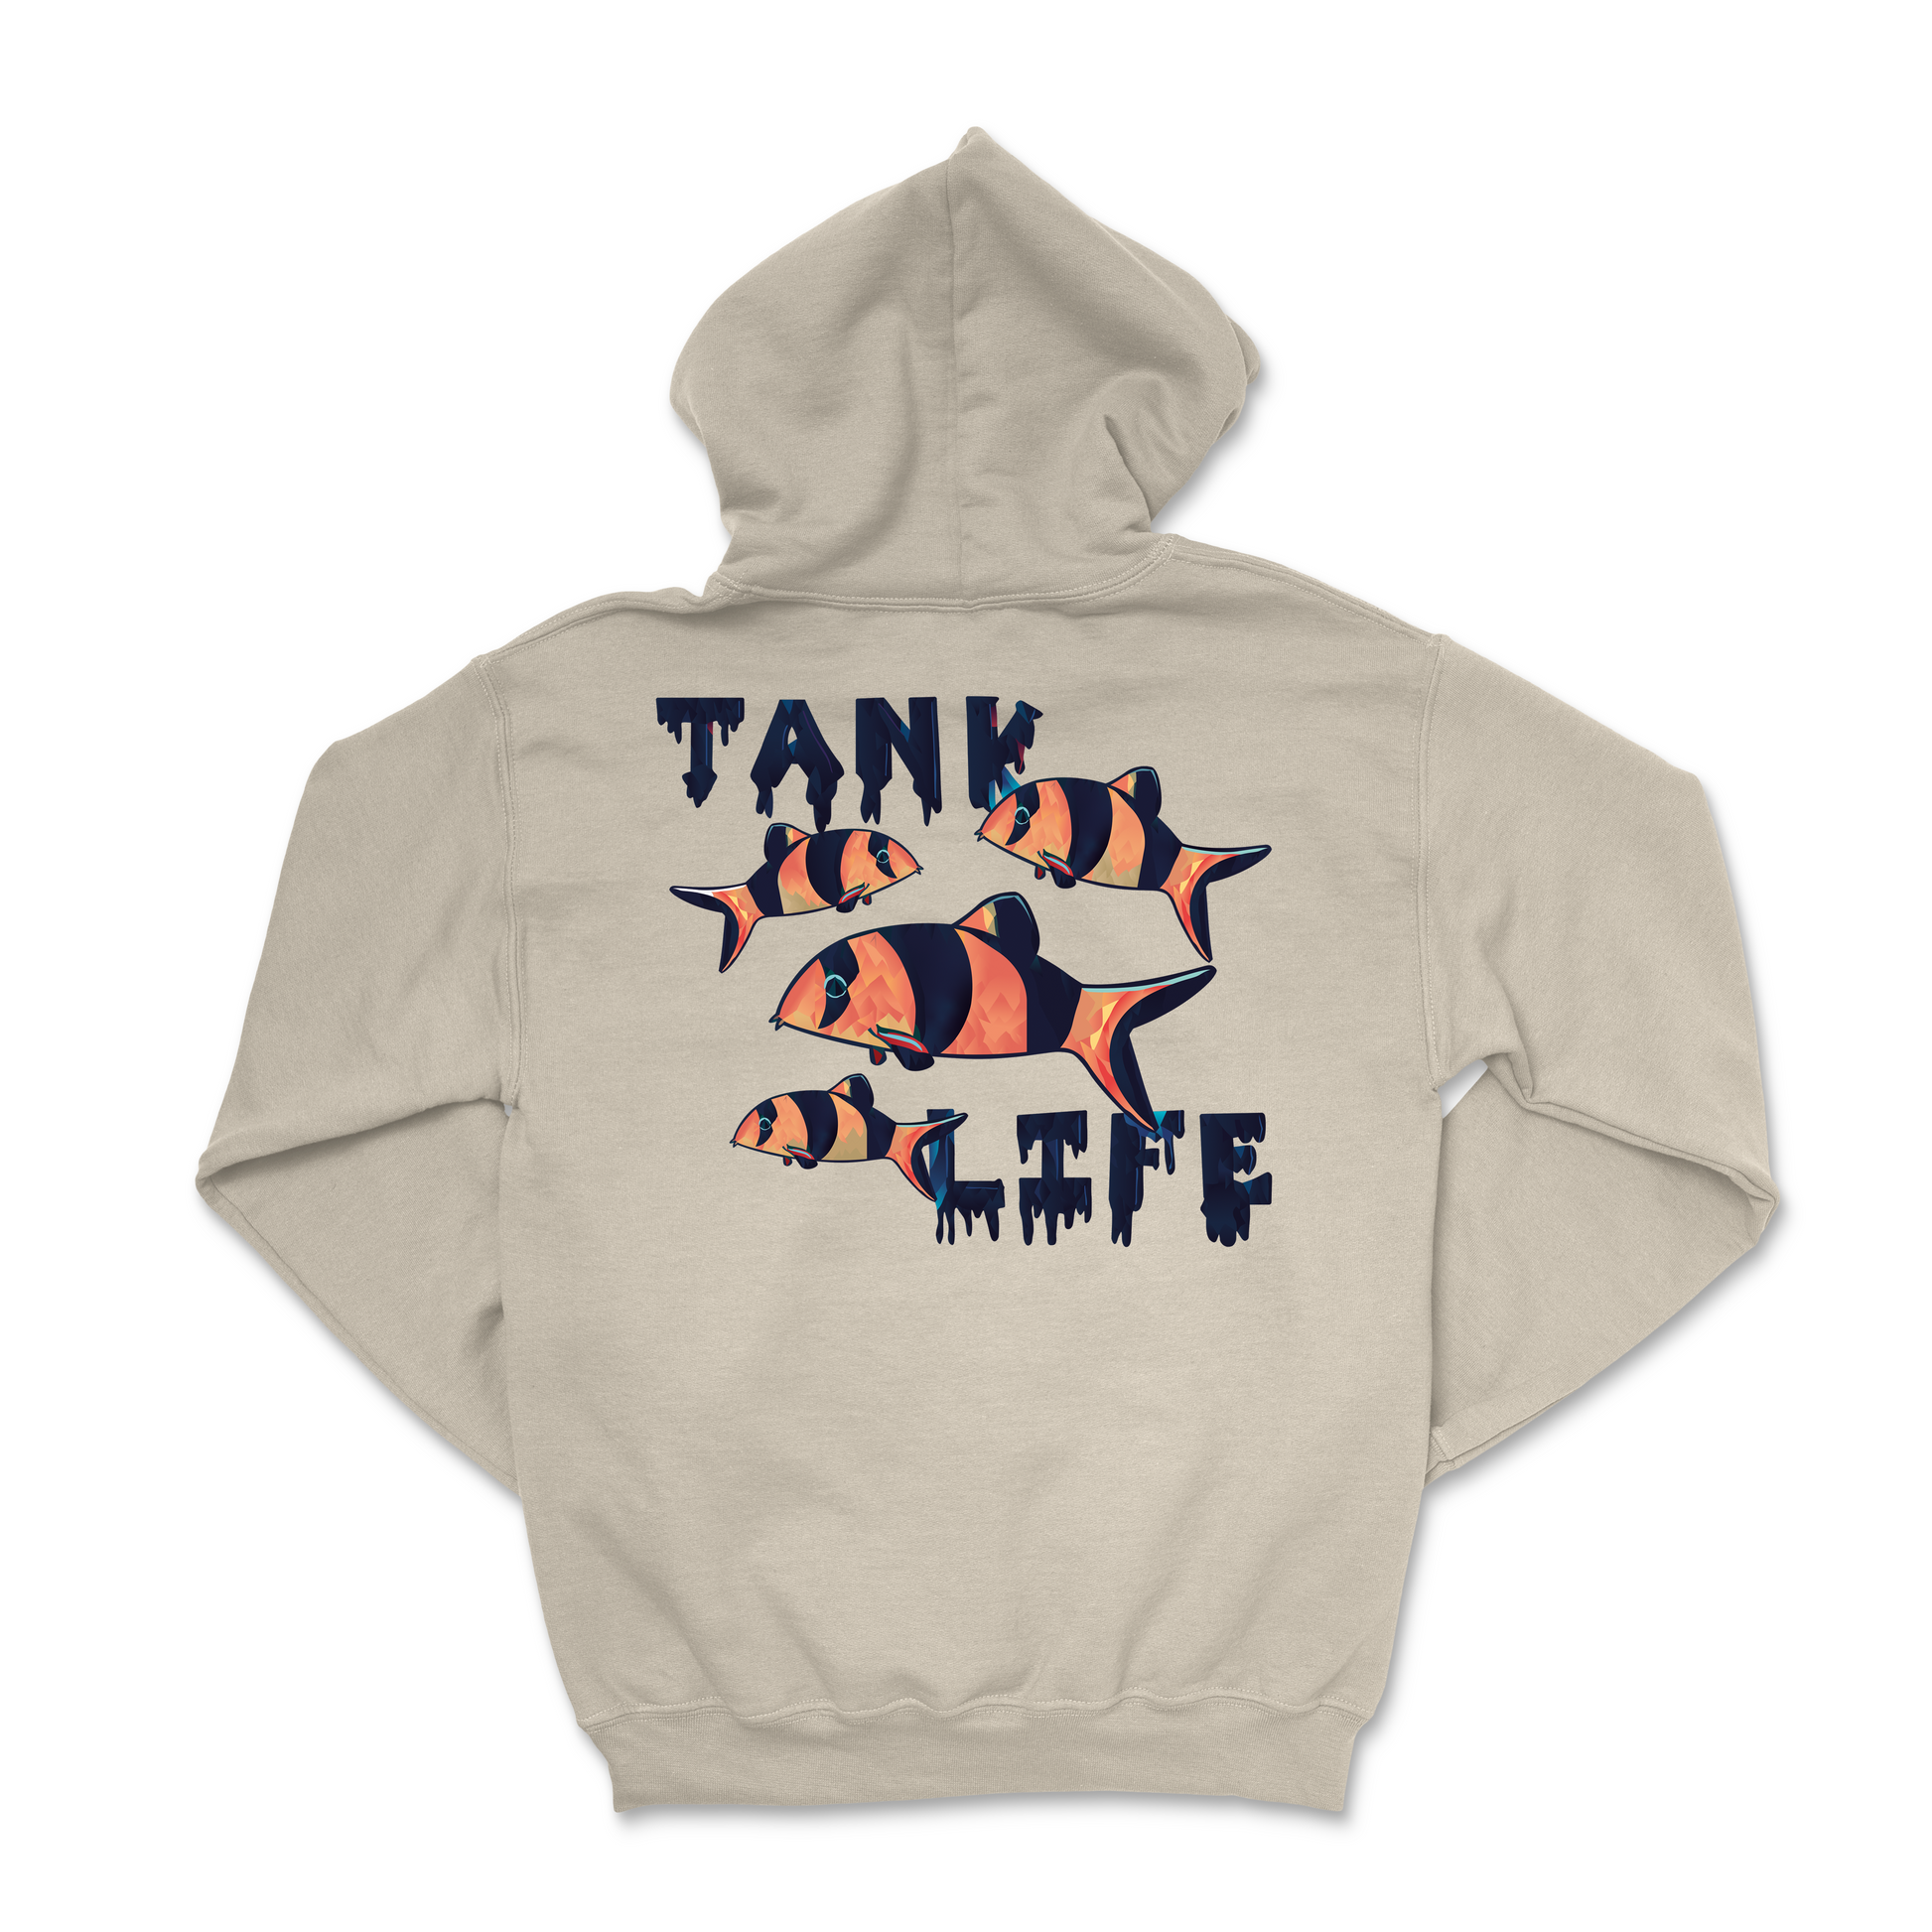 The Tank Life Apparel clown loach design on a super soft and comfortable beige sand hoodie. 